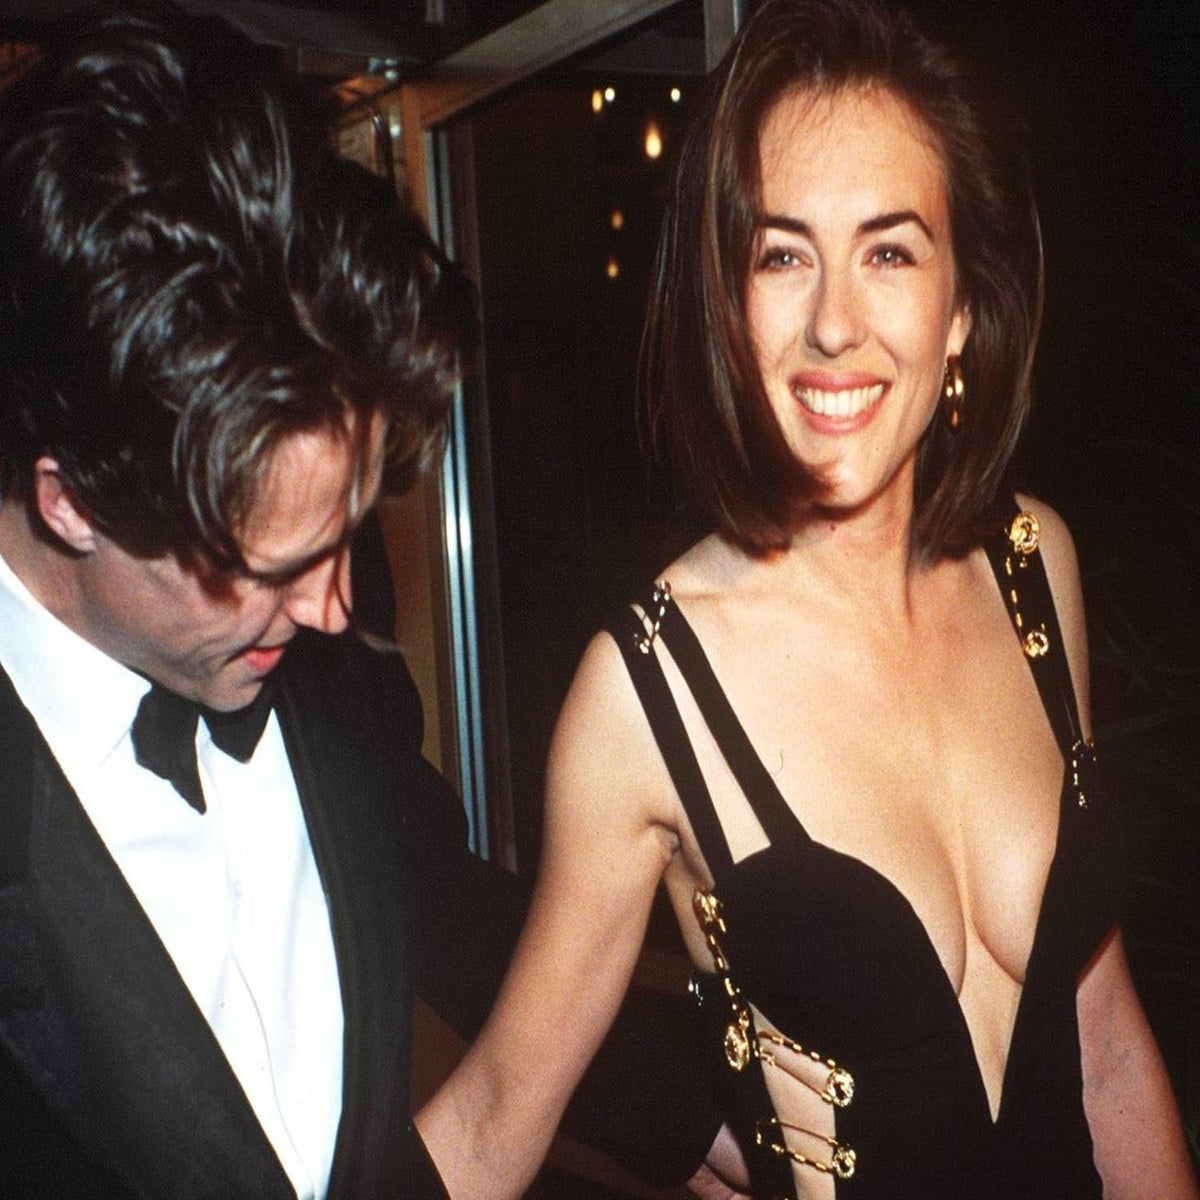 What are Gianni Versace's most famous dresses? From Liz Hurley's safety pin  frock to Donatella's belt dress